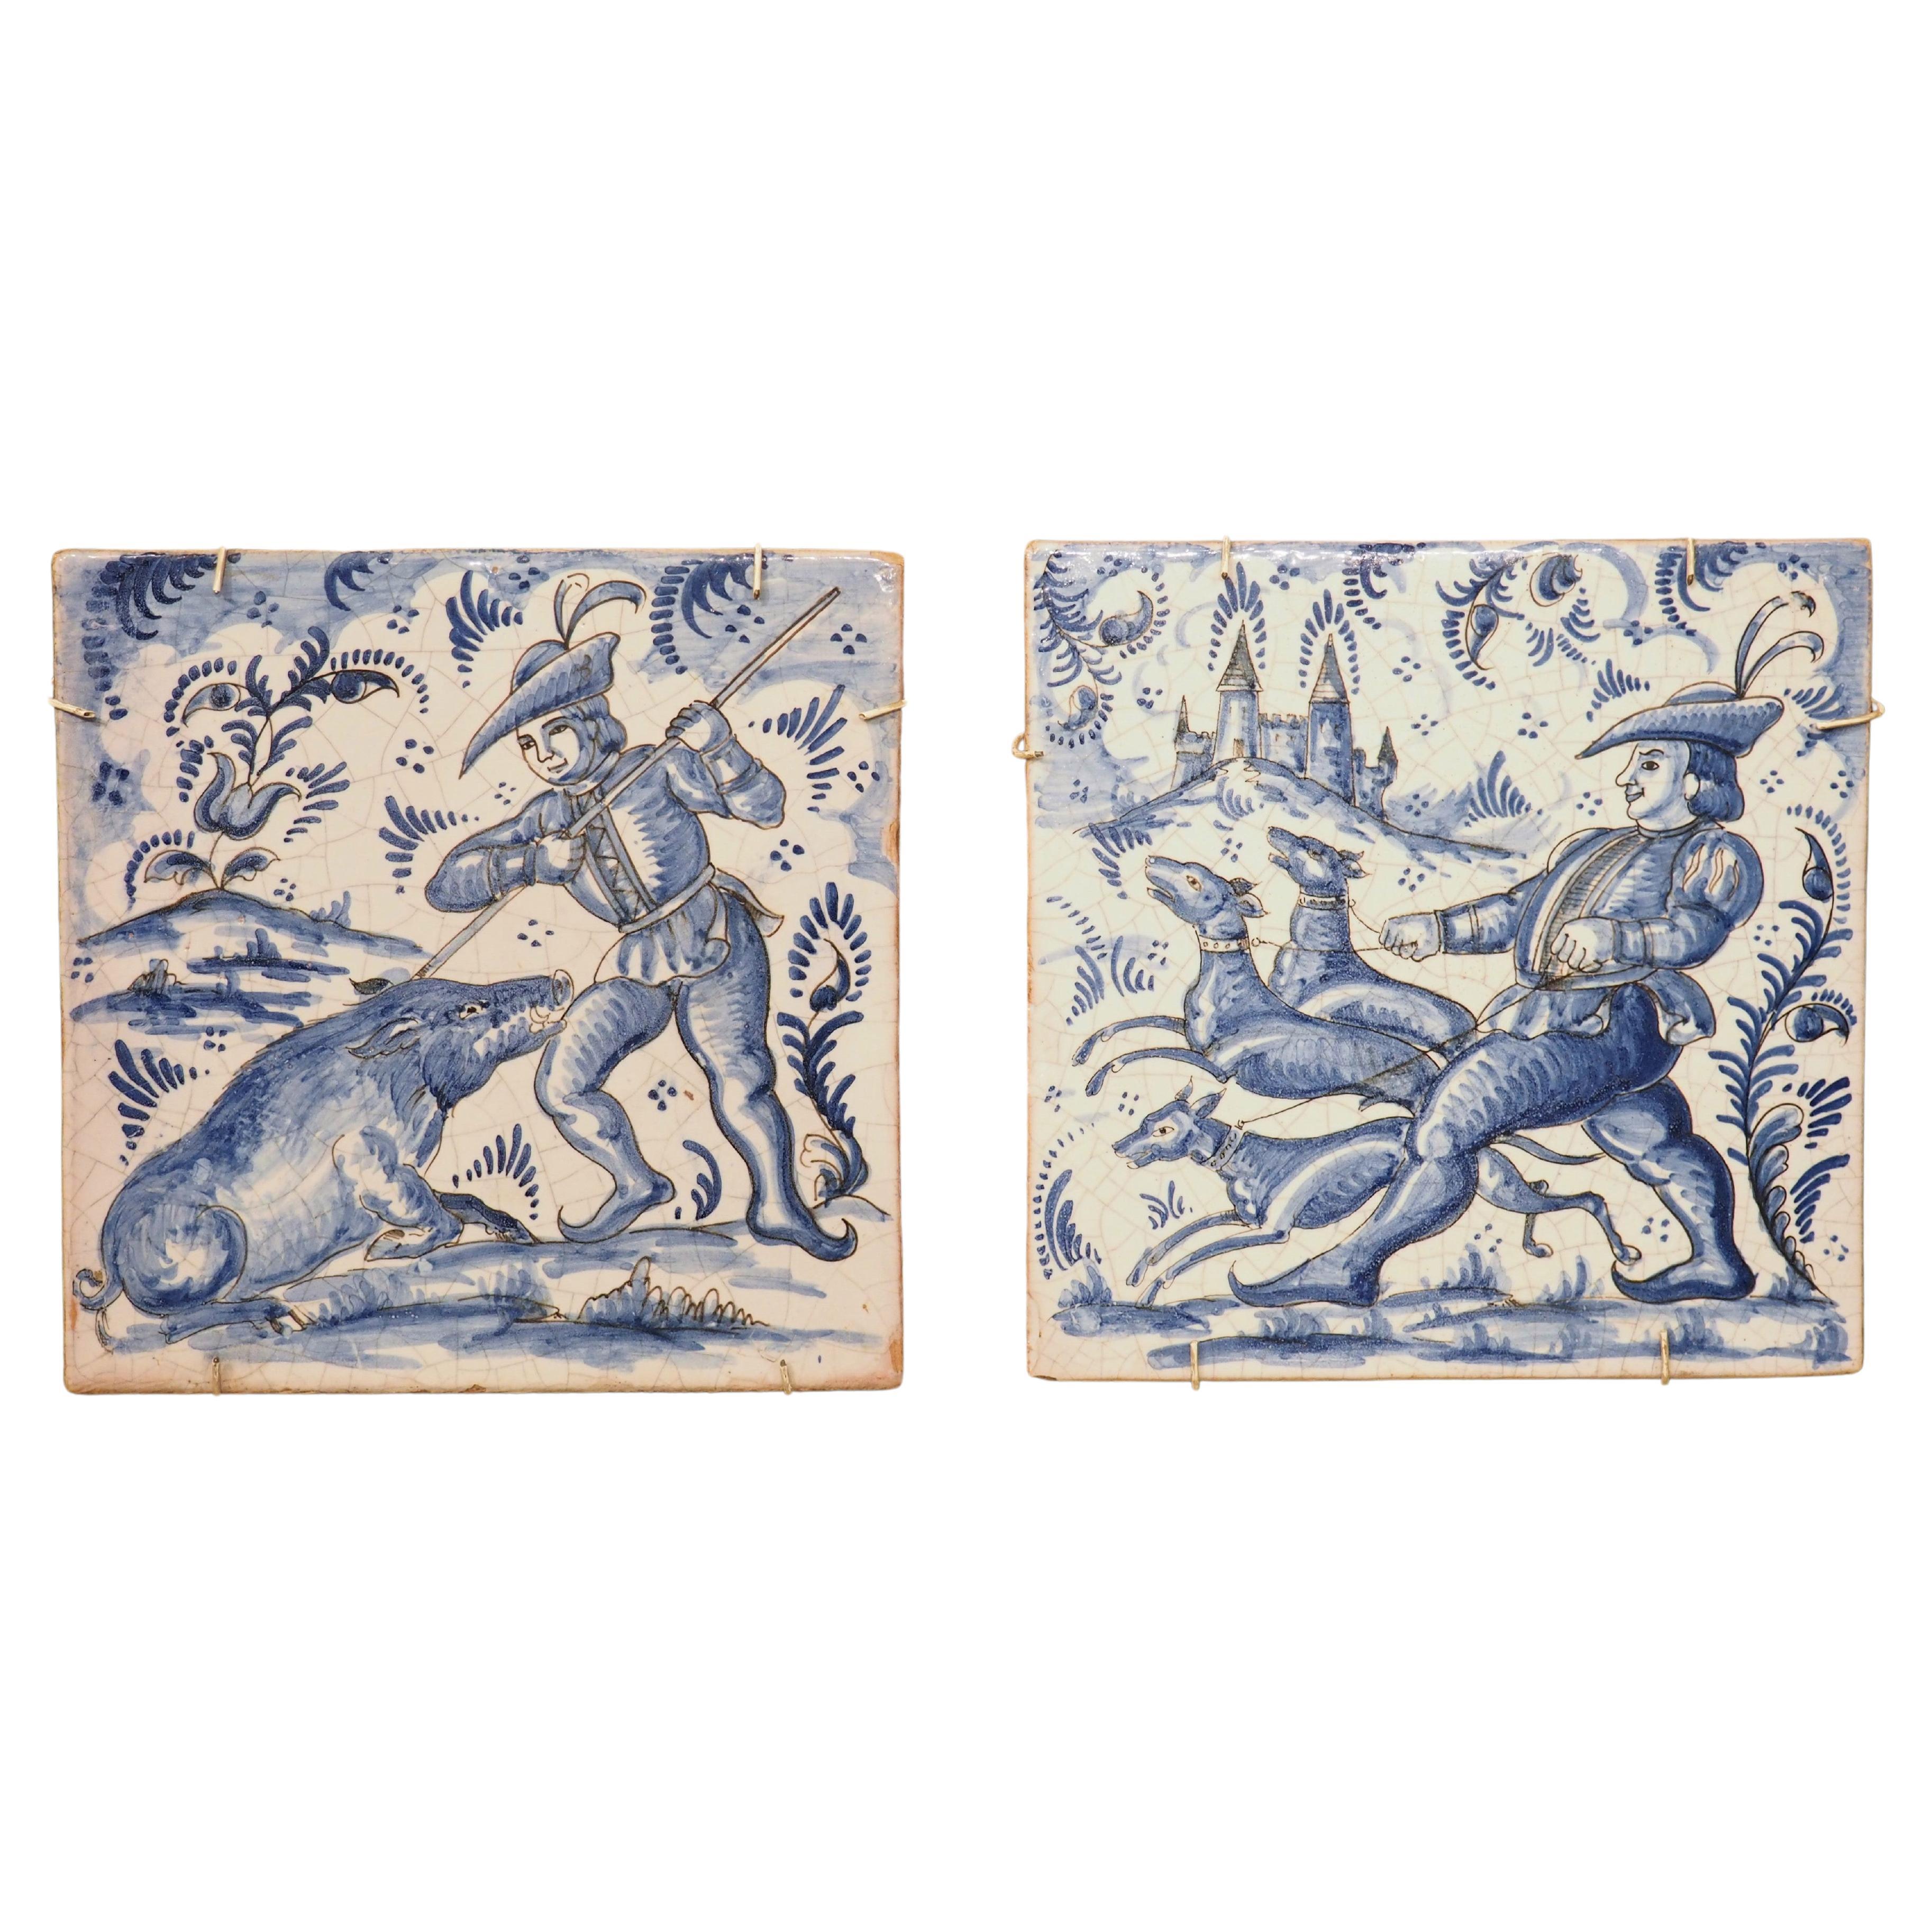 Pair of French Blue and White Ceramic Hunting Scene Tiles, 19th Century